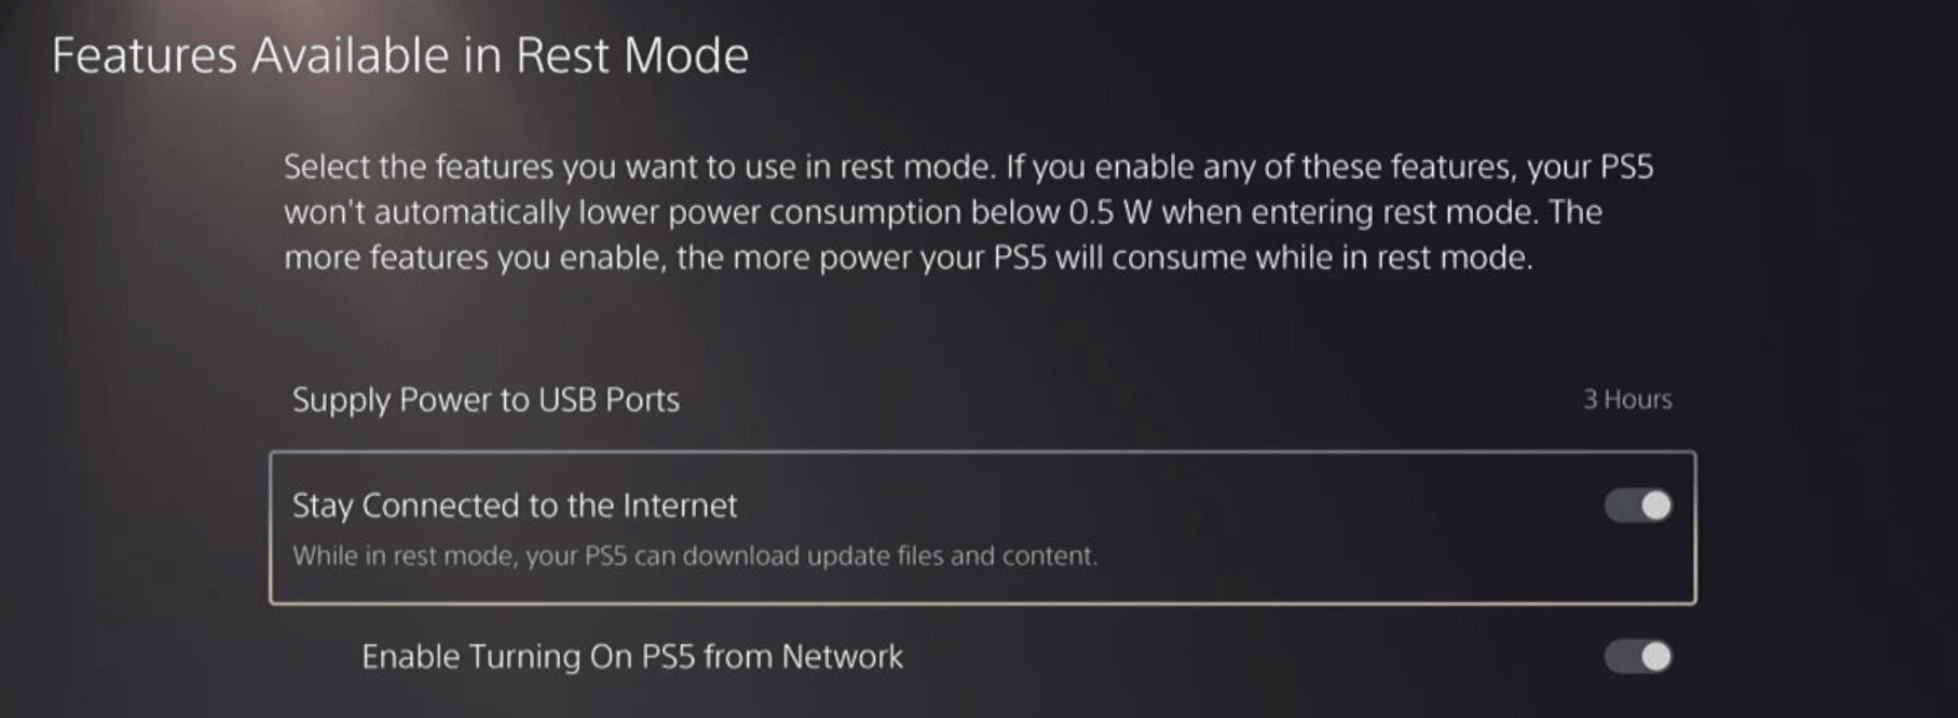 Stay Connected to the Internet is toggled in PS5 rest mode settings menu to enable automatic updates of Smalland Survive the Wilds